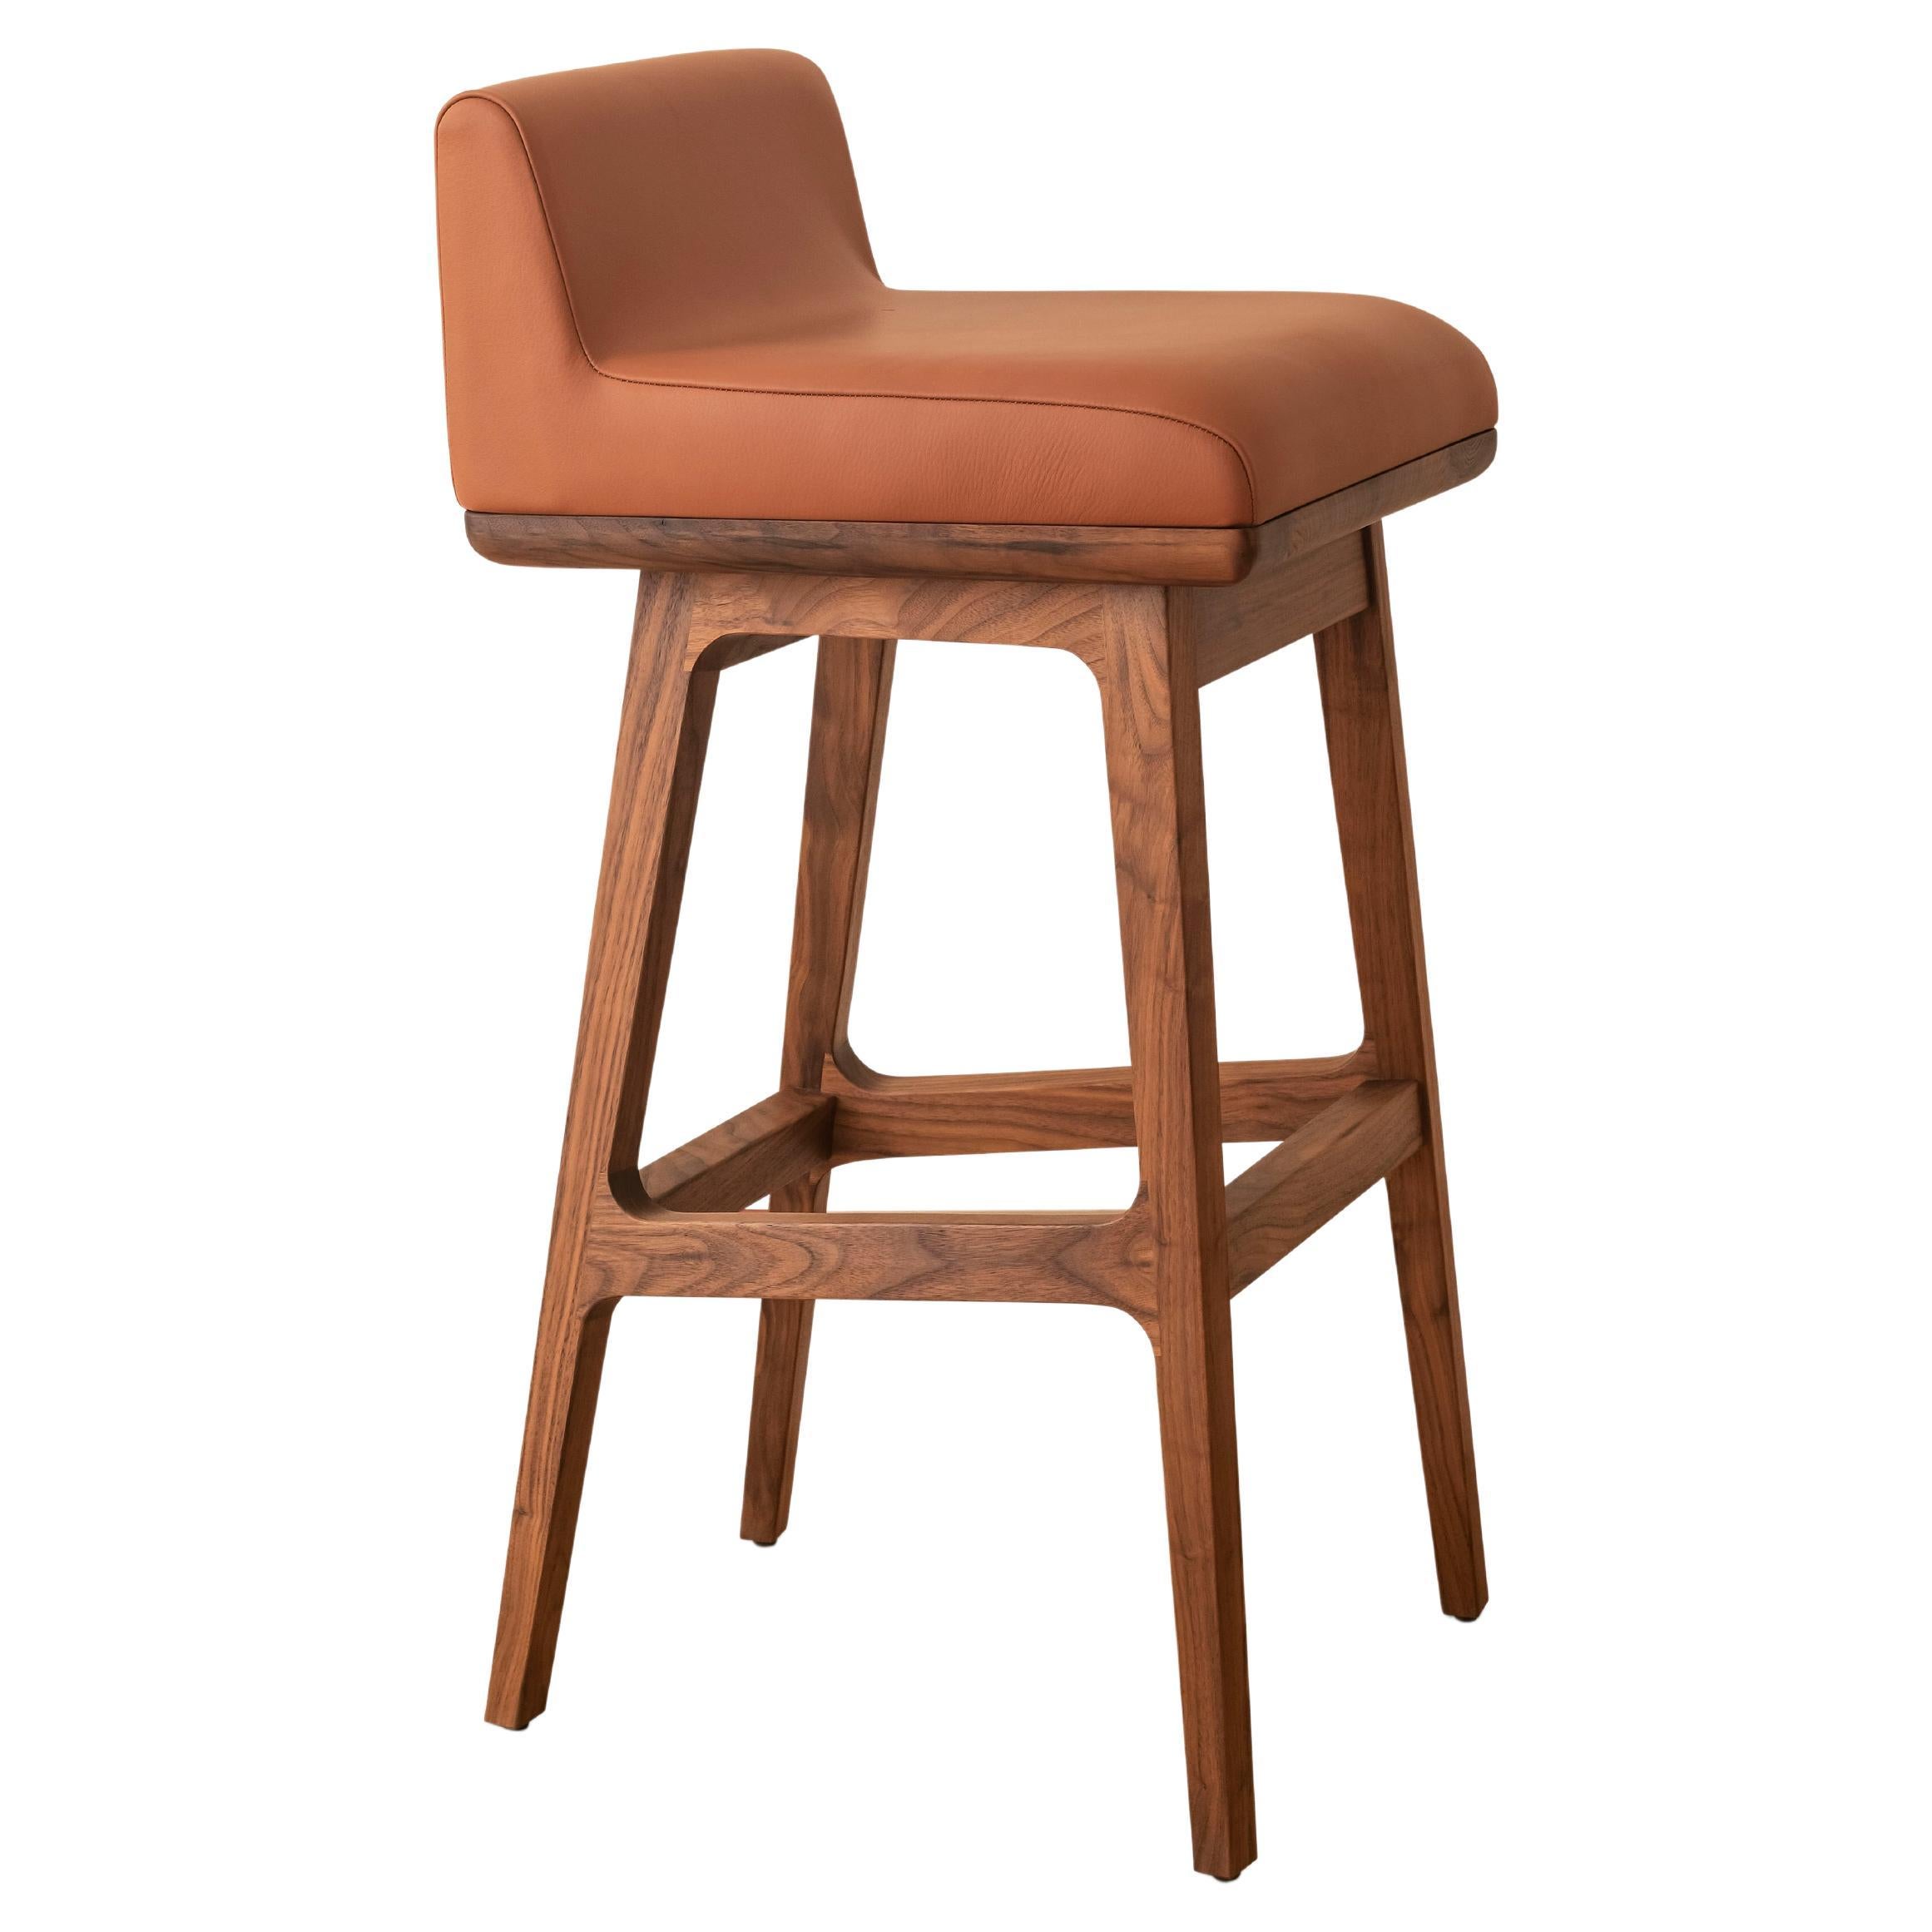 Contemporary Solid Wood and Leather Limantour Bar or Counter Stool by Luteca